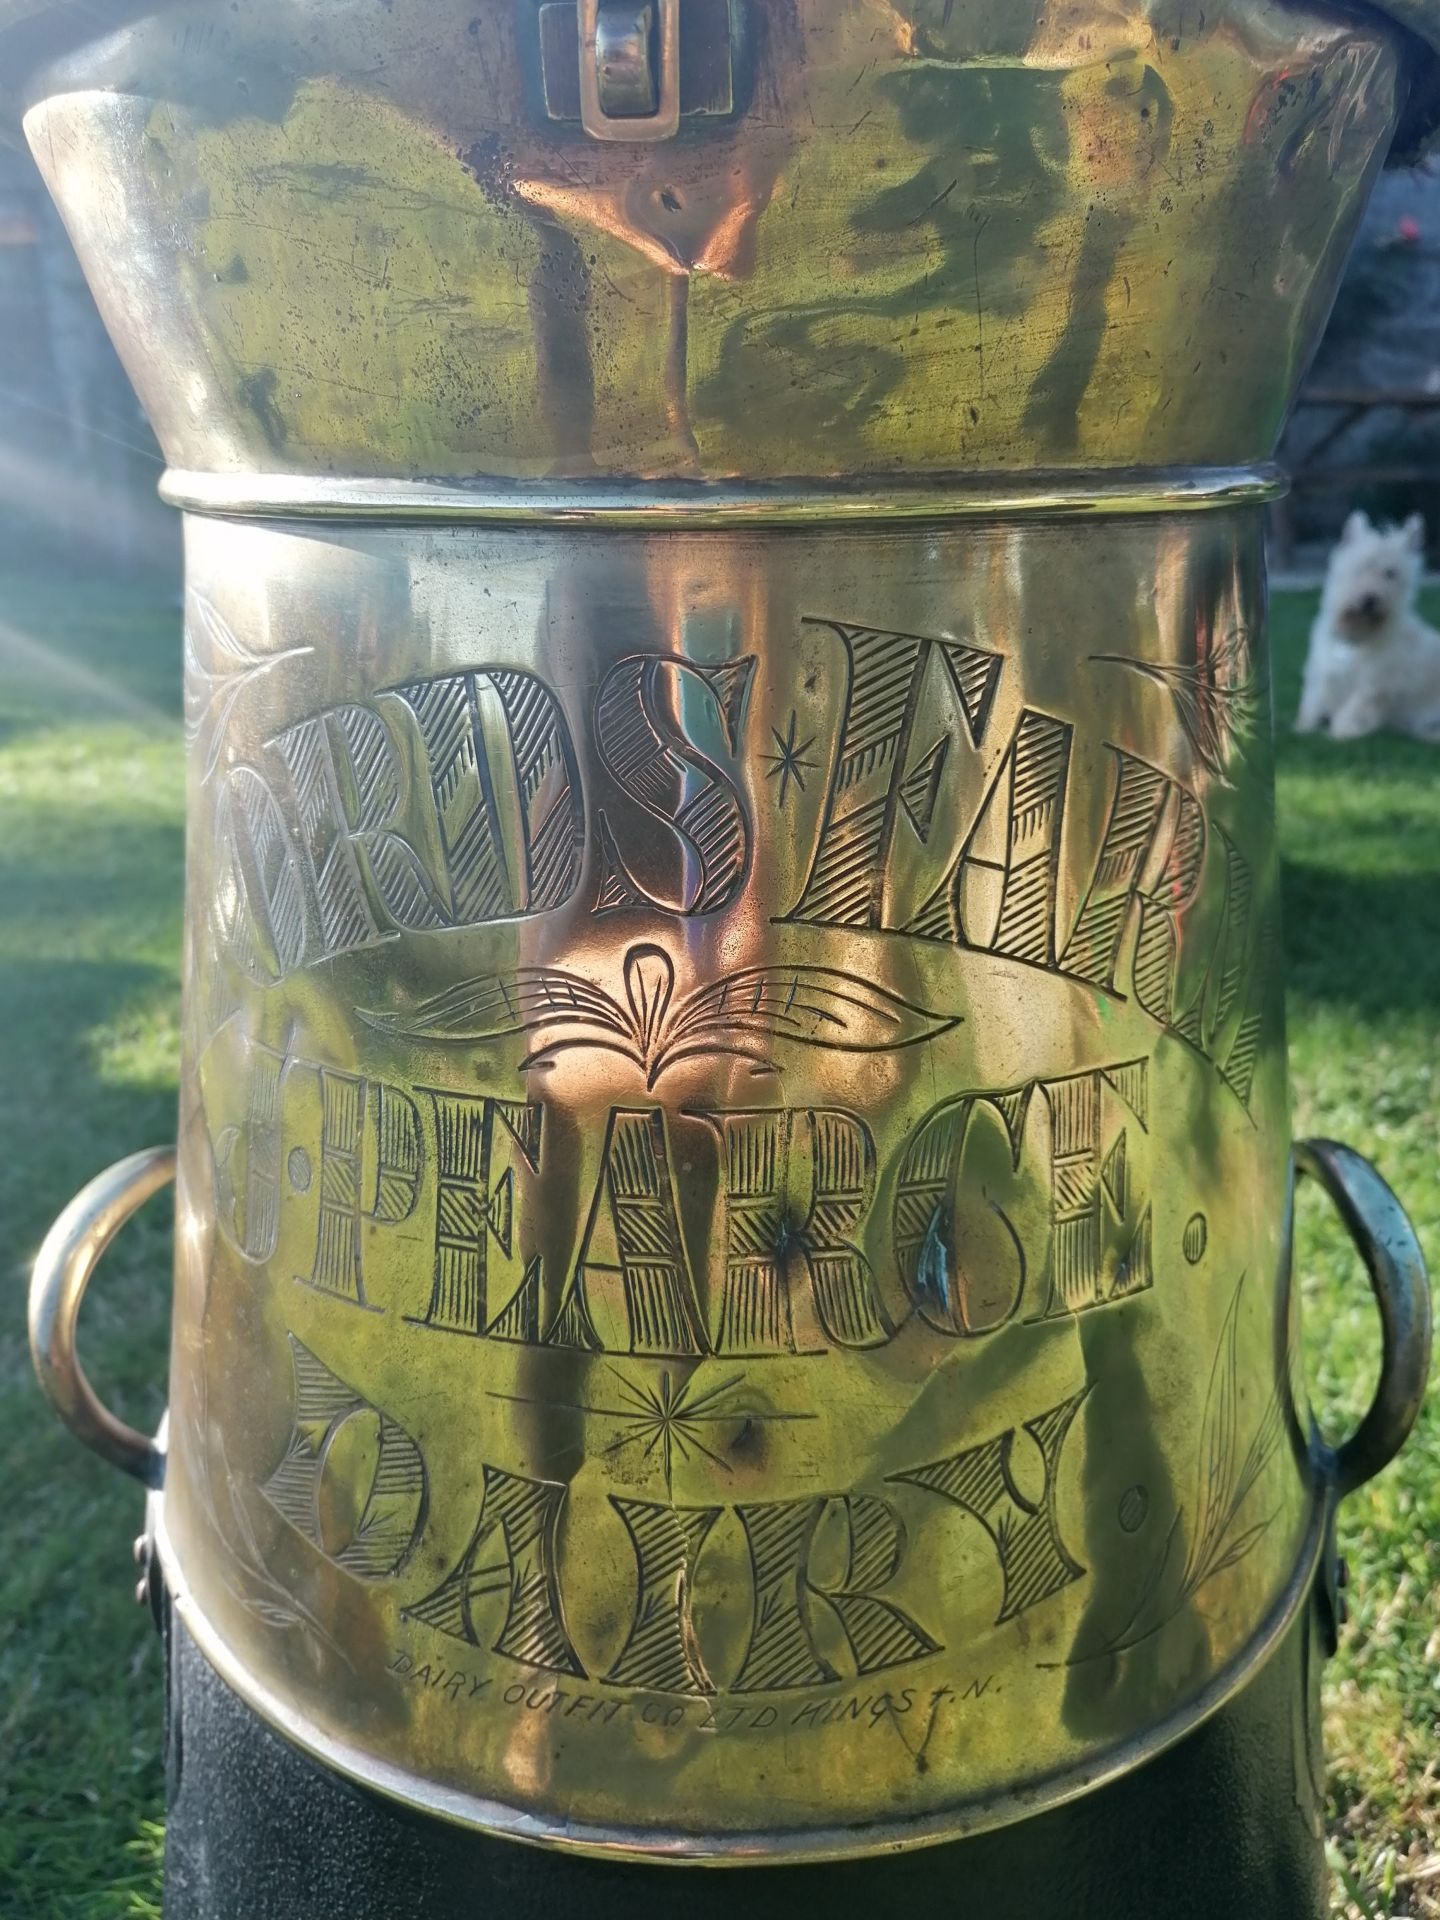 Delivery churn made by Dairy Outfitters Company, half brass engraved Lords Farm J Pearce. 31" high - Bild 2 aus 2